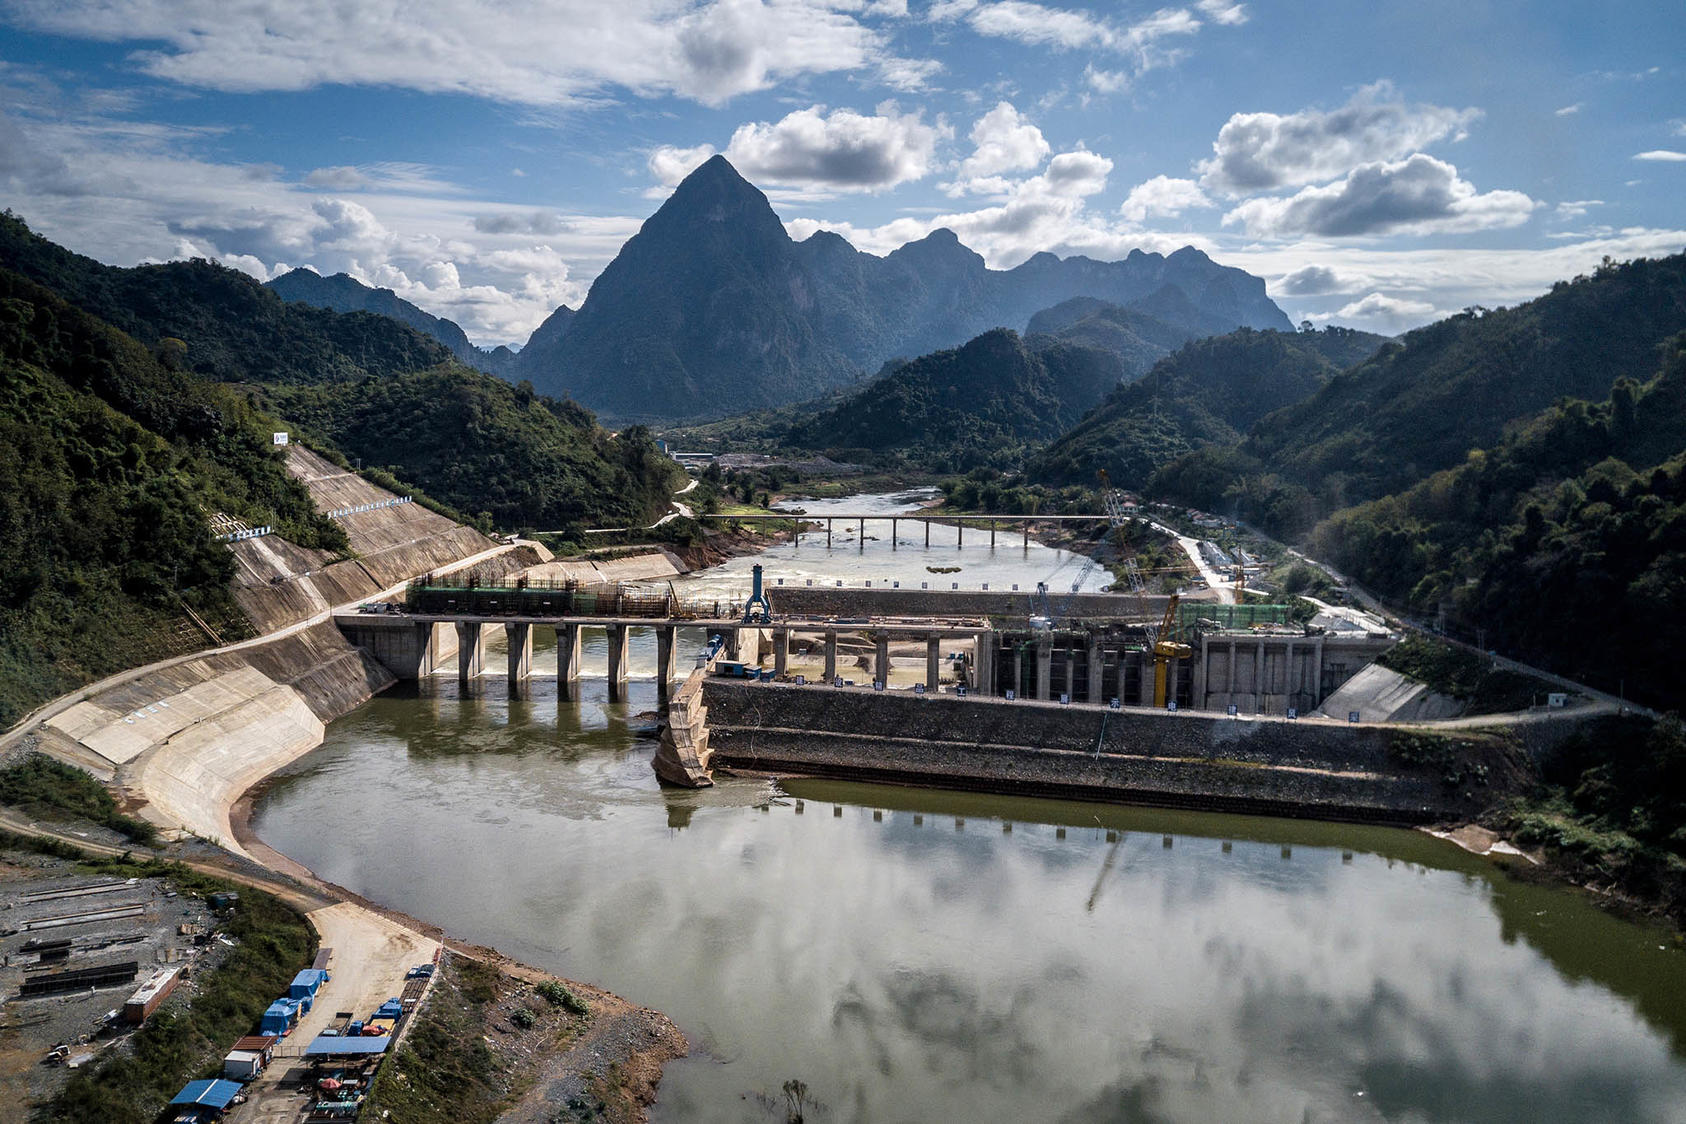 The site of the Nam Ou 1 dam in northern Laos. December 10, 2018. Development on the Mekong River and its network of tributaries is forcing the relocation of many villages. (Sergey Ponomarev/The New York Times)